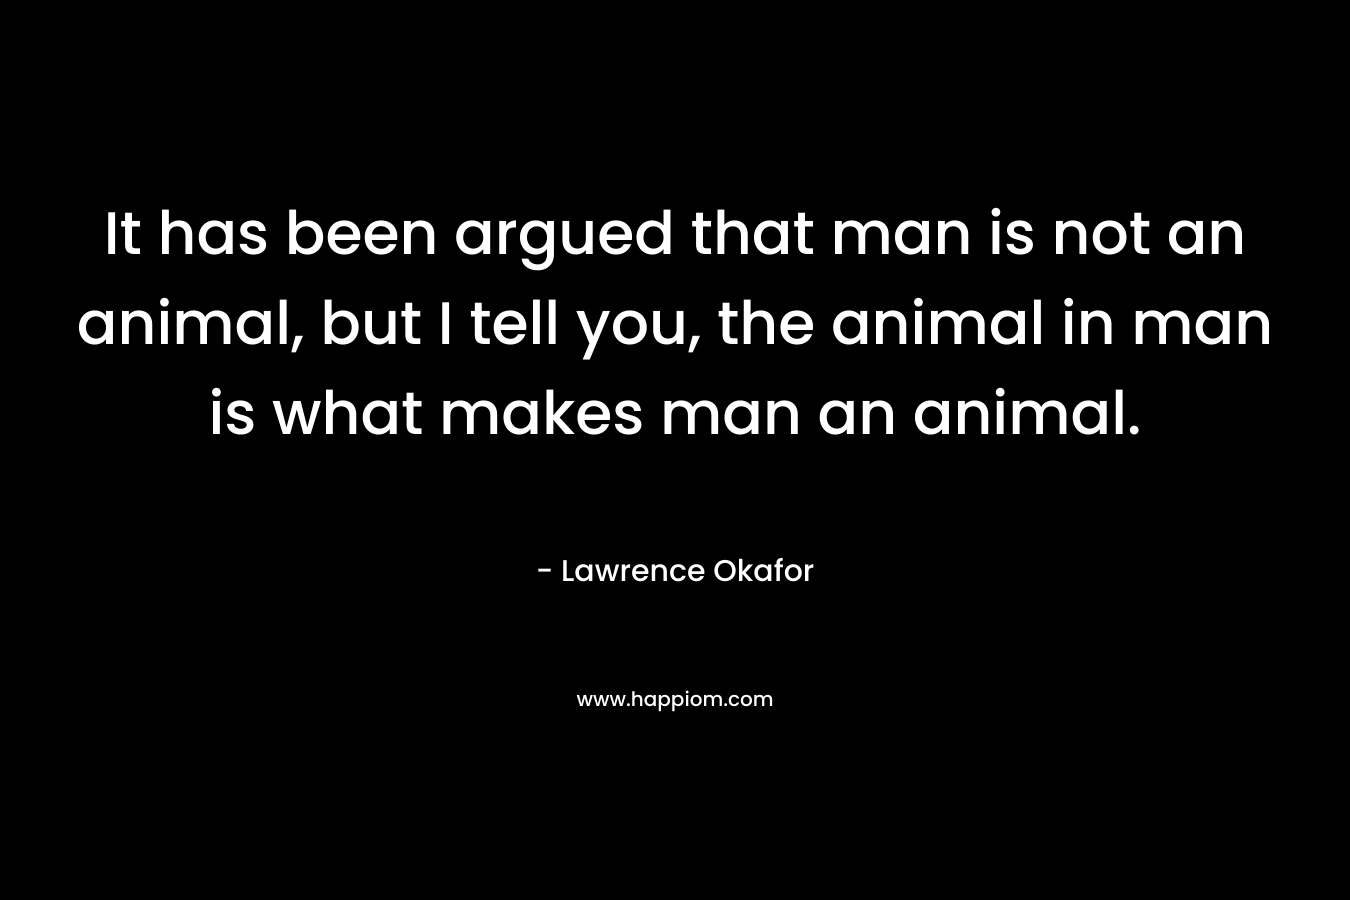 It has been argued that man is not an animal, but I tell you, the animal in man is what makes man an animal.